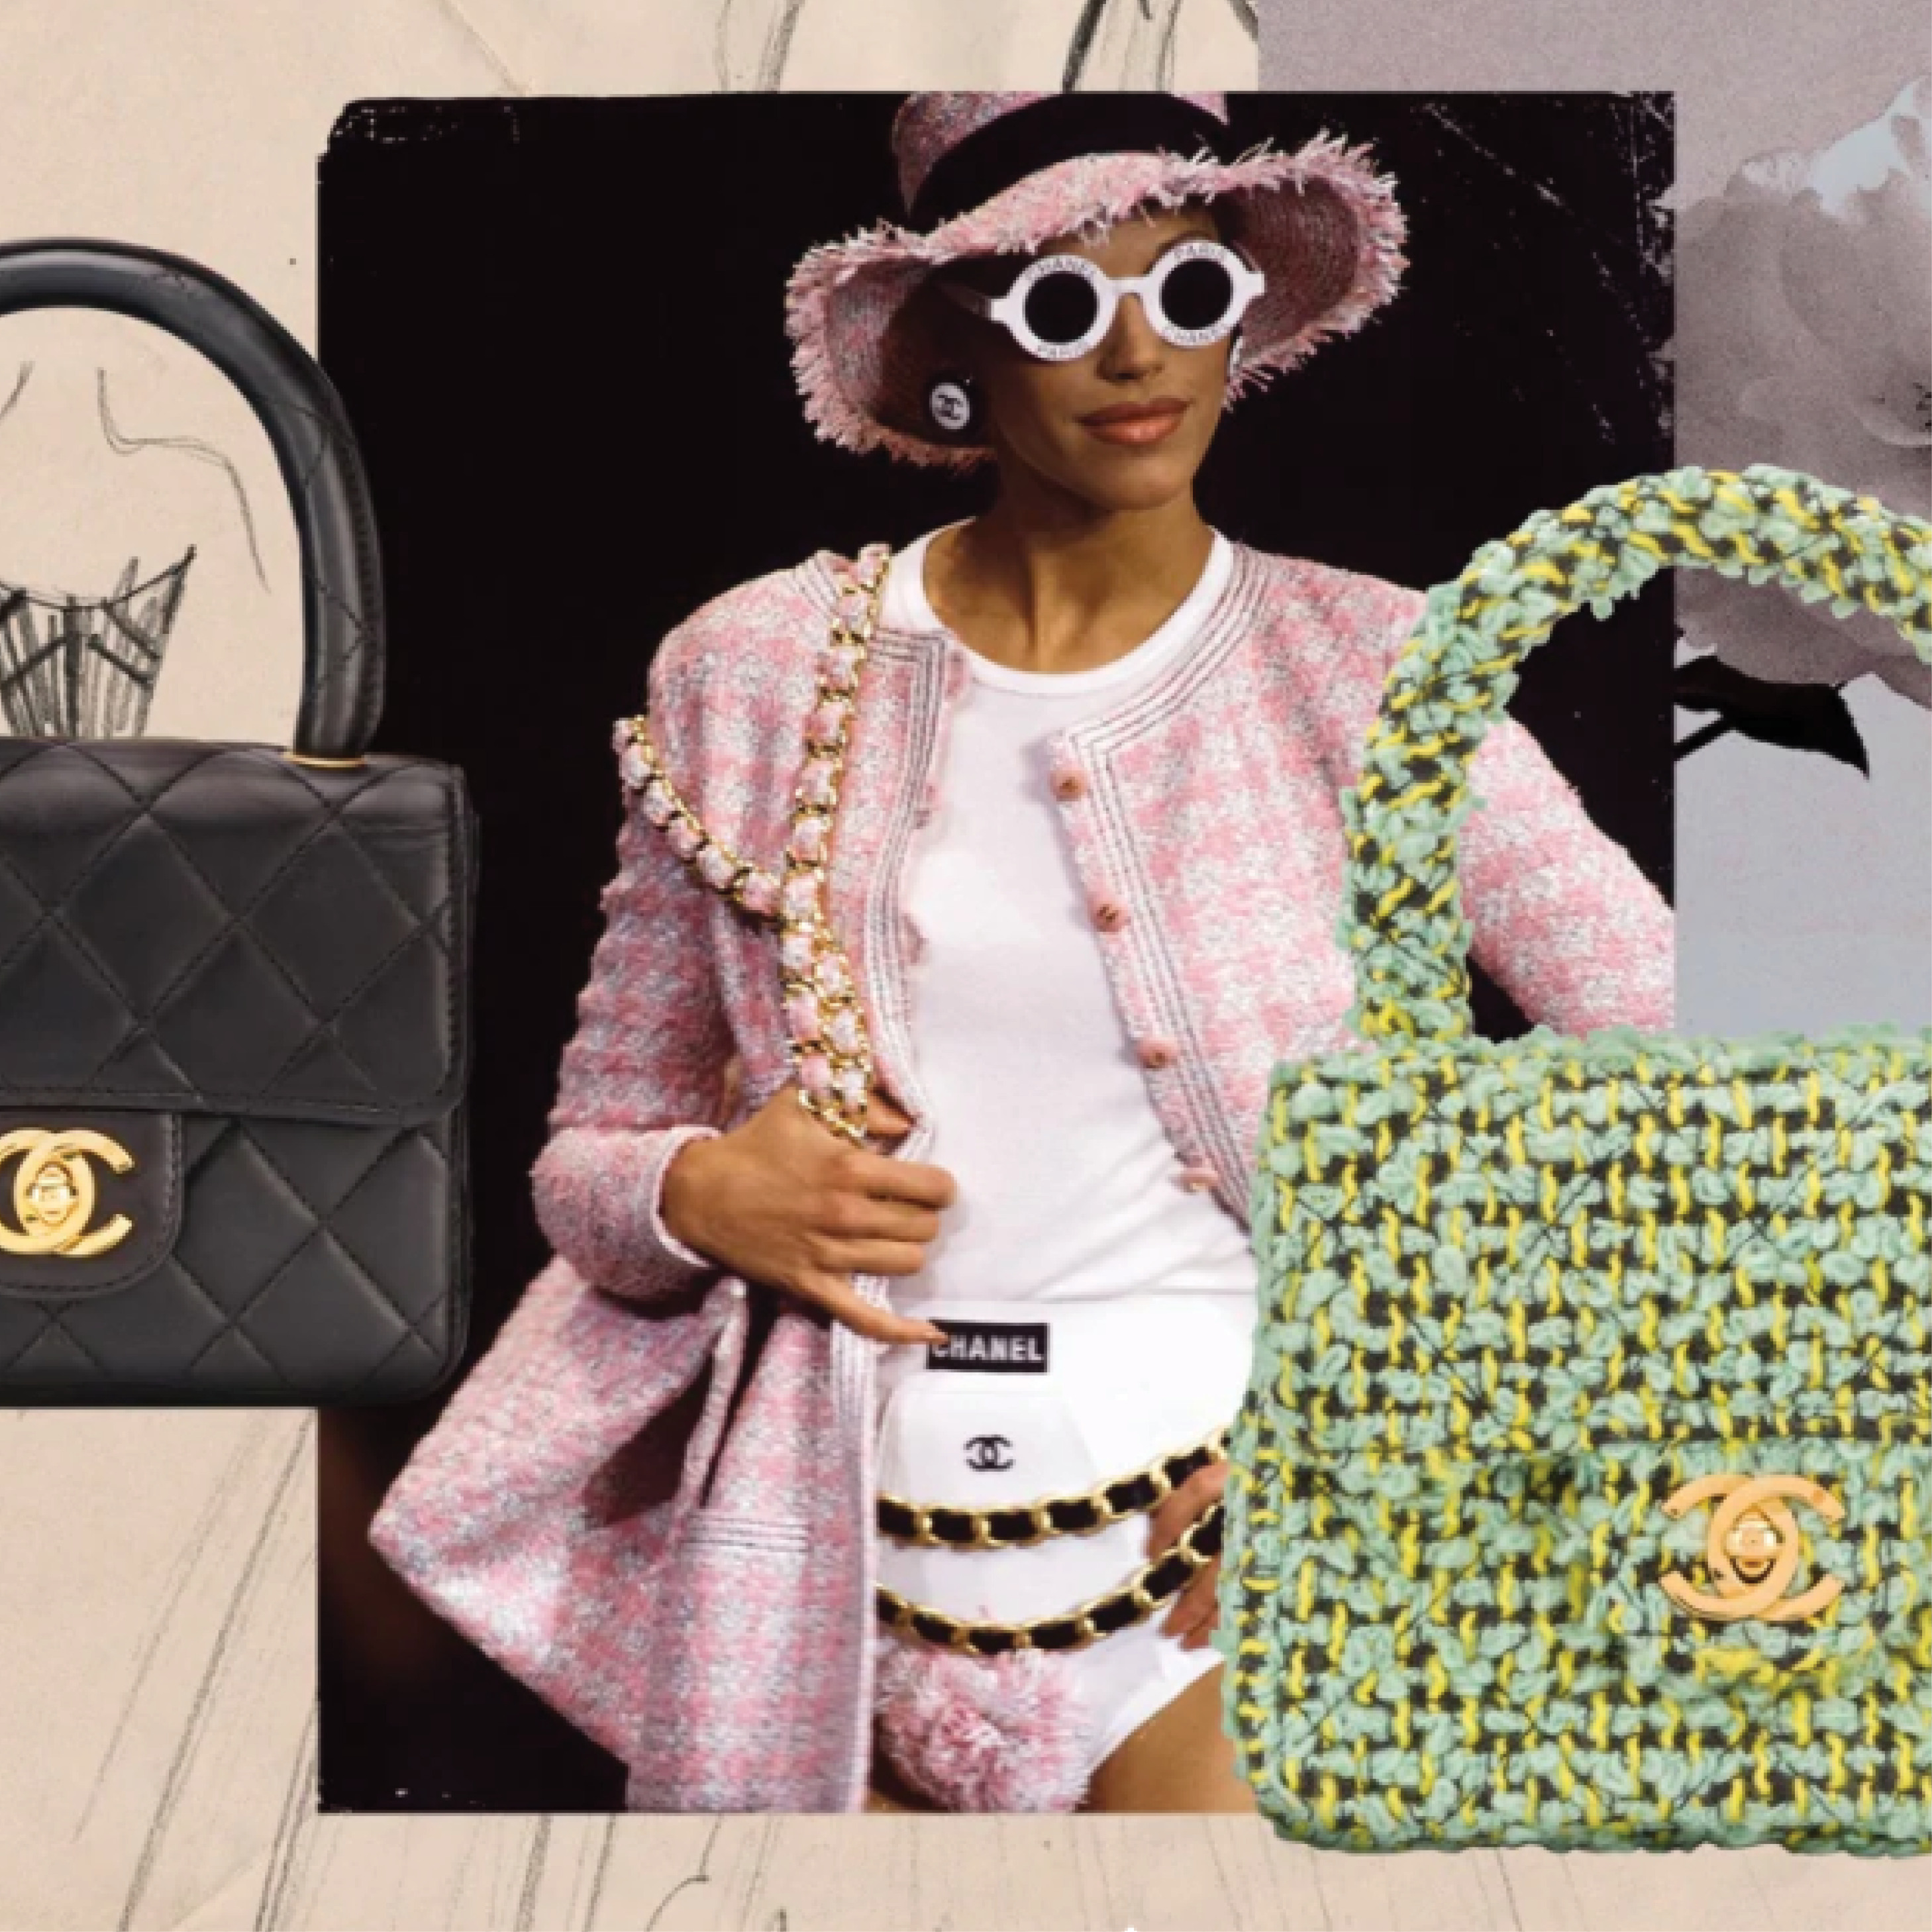 FARFETCH DEBUTS OUR COLLECTION OF COVETED CHANEL